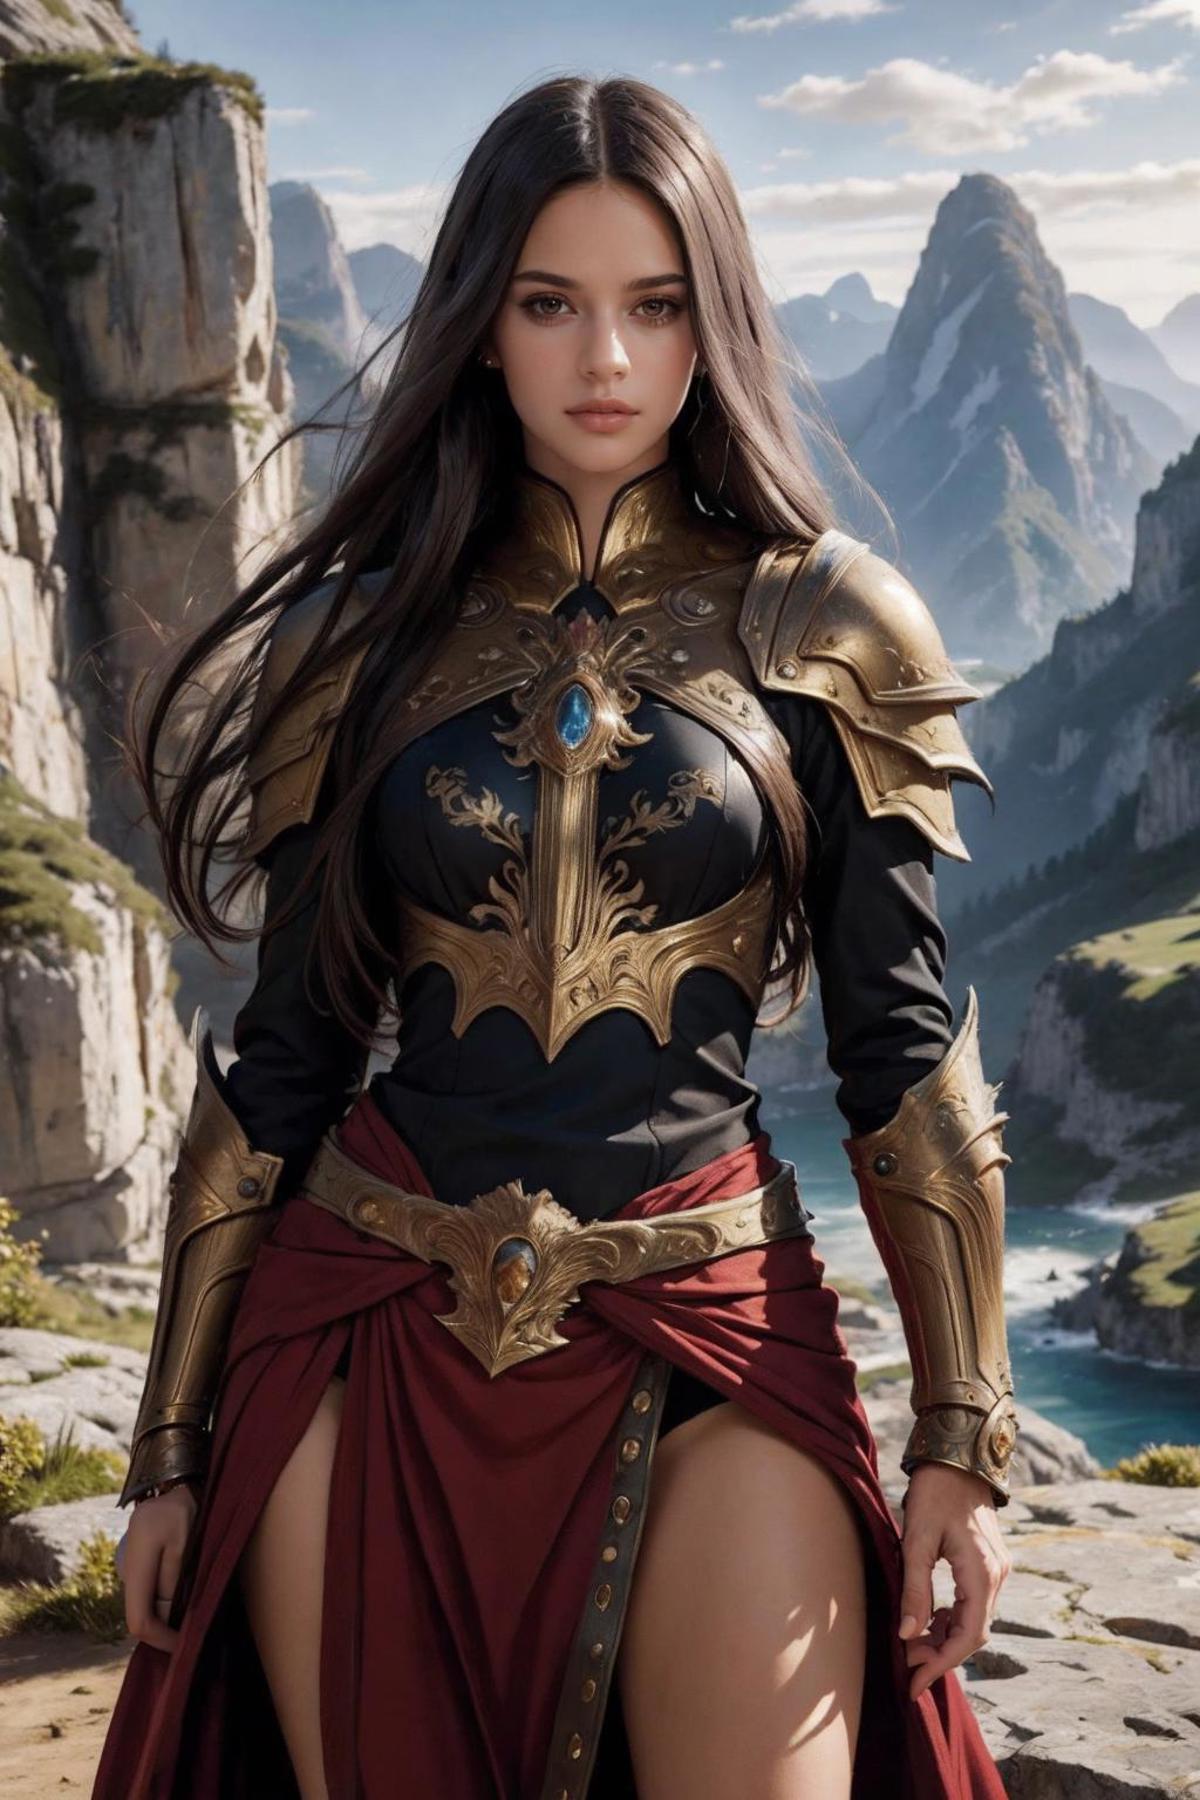 Fantasy Art of a Warrior Woman in Armor with a Red Skirt and Long Hair.